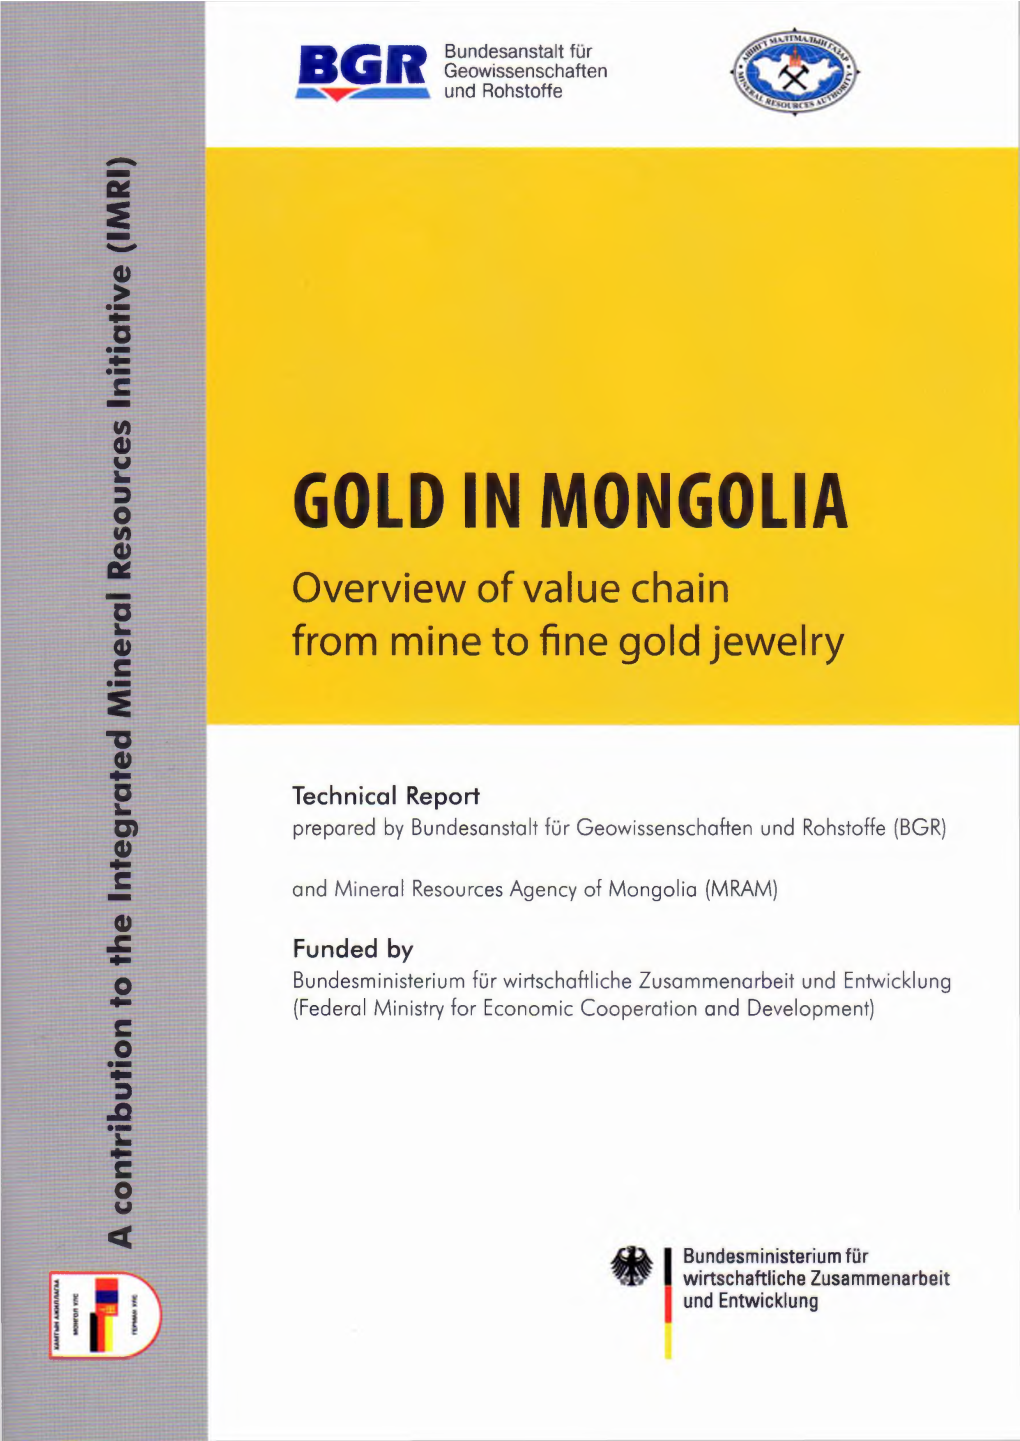 GOLD in MONGOLIA - Overview of Value Chain from Mine to Fine Gold Jewelry